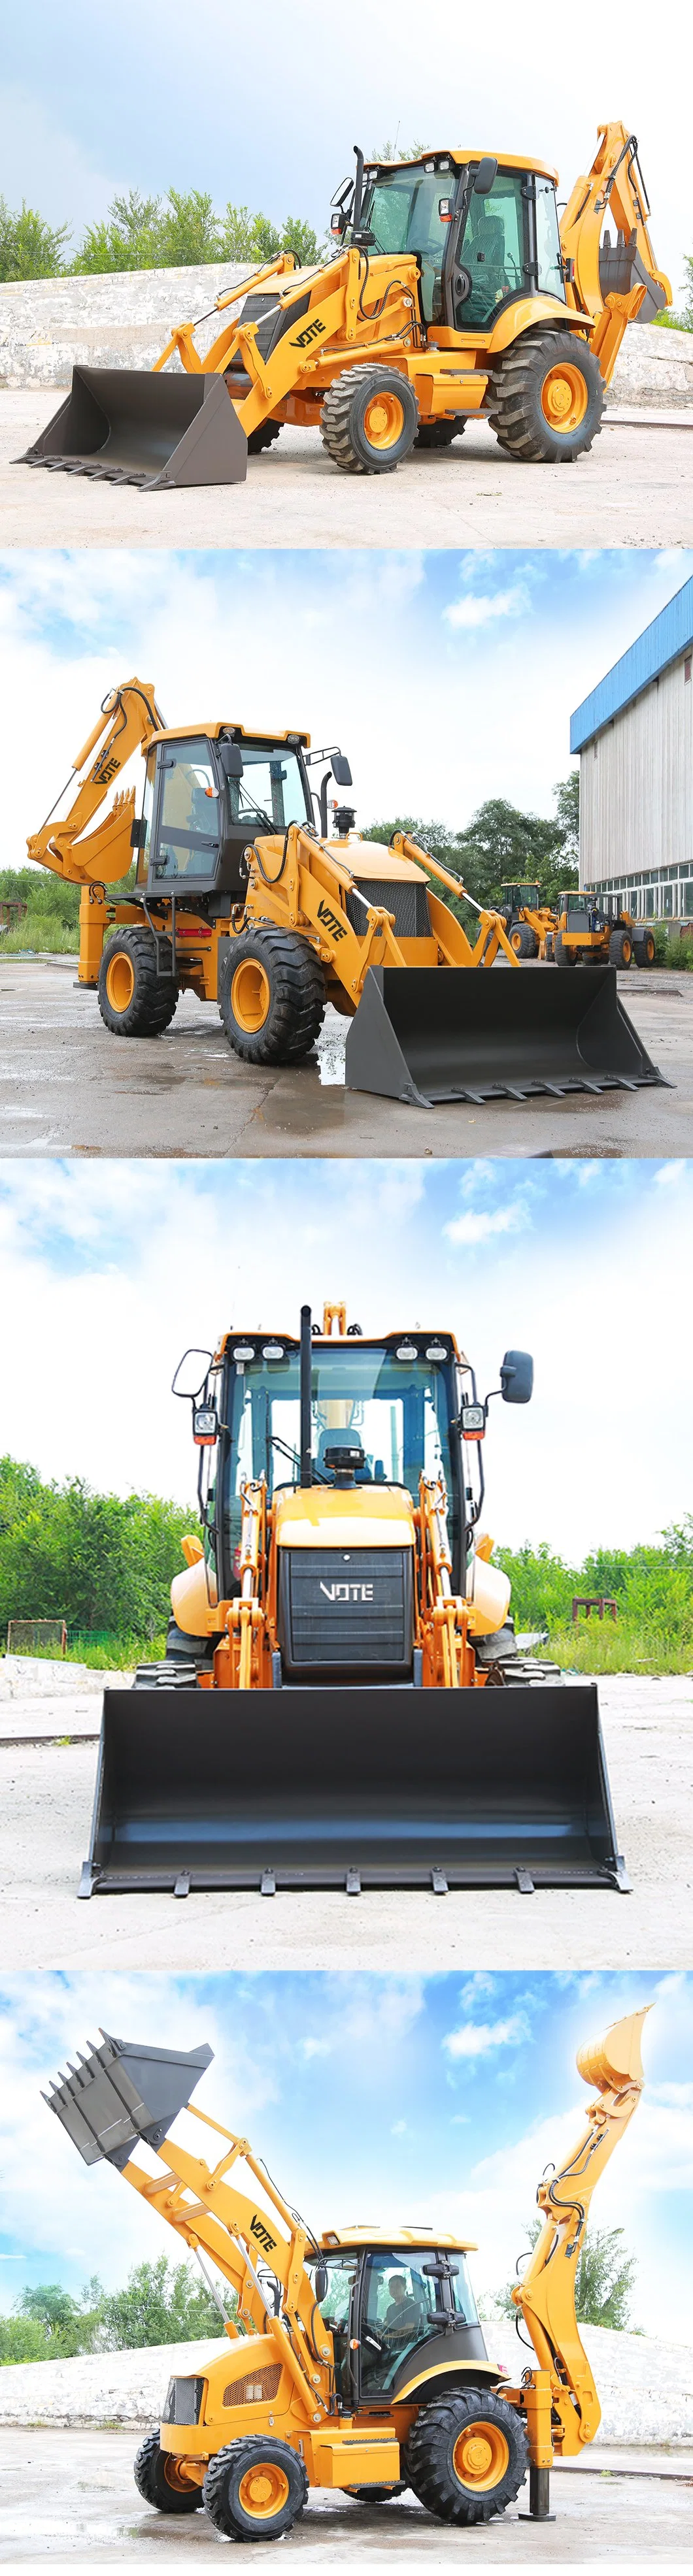 New Design 4 Wd Cheap Backhoe Loader Luxury Edition Factory Direct Sales Loader Backhoe with Price Mini Articulated /Integrated